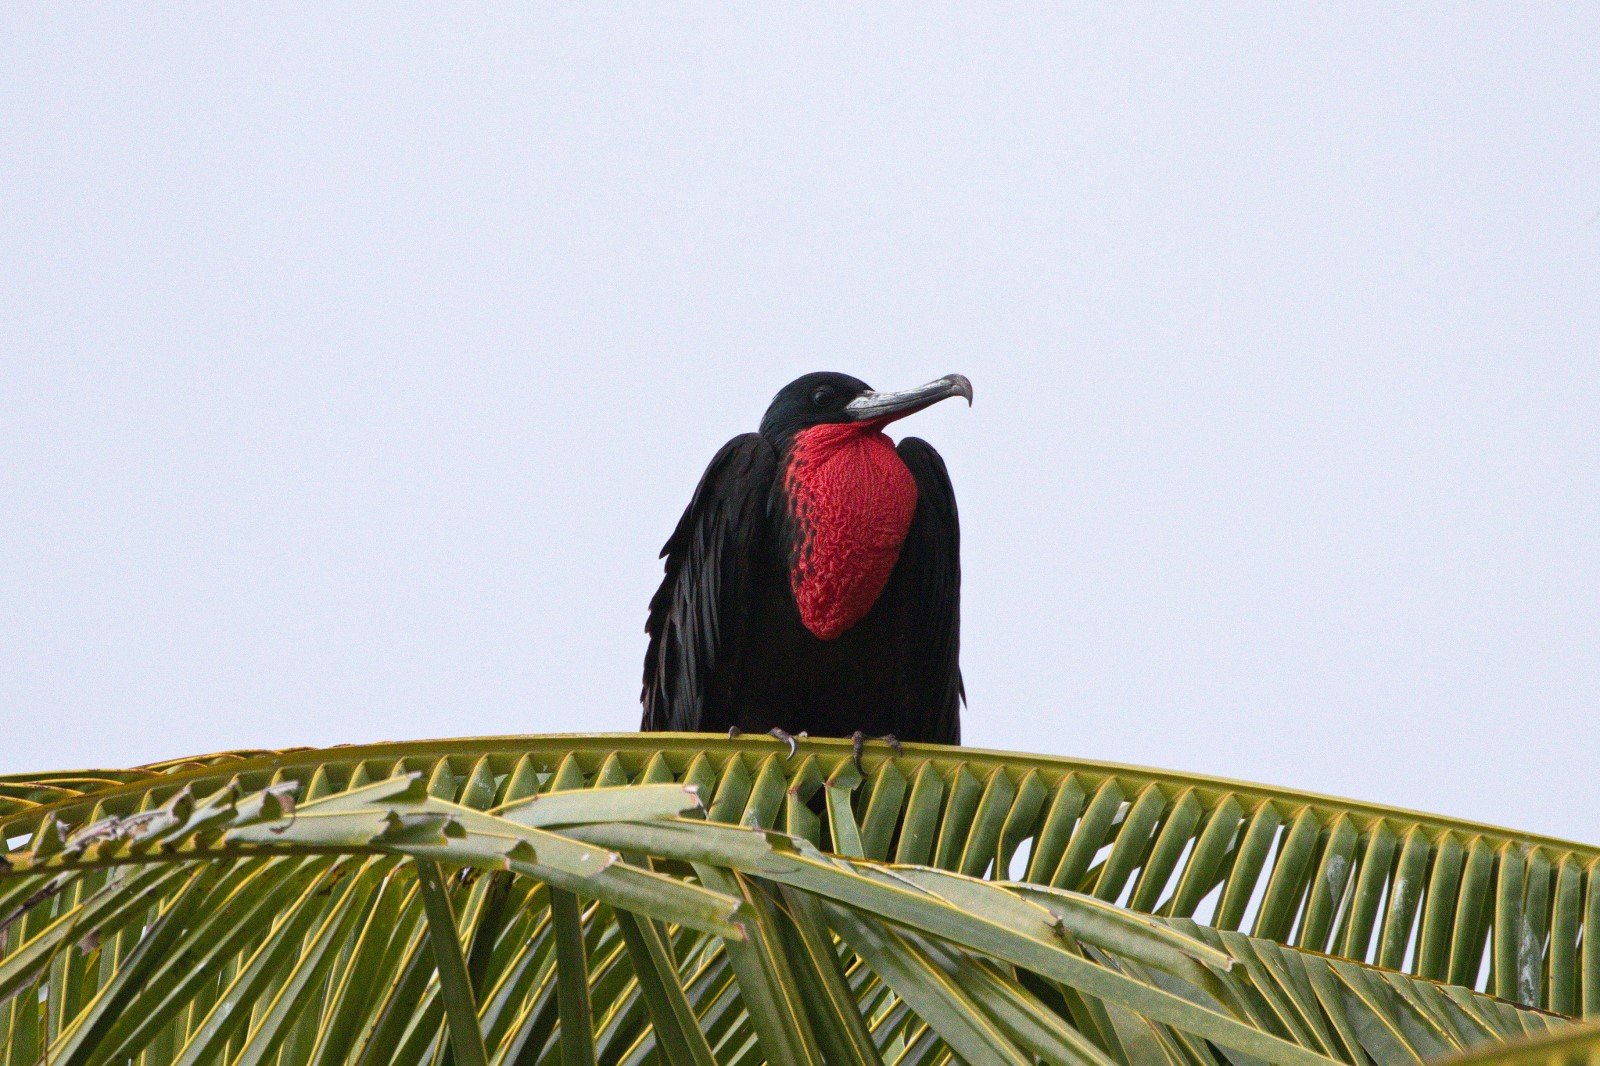 Greater frigatebird with a red throat and chest perched on a palm